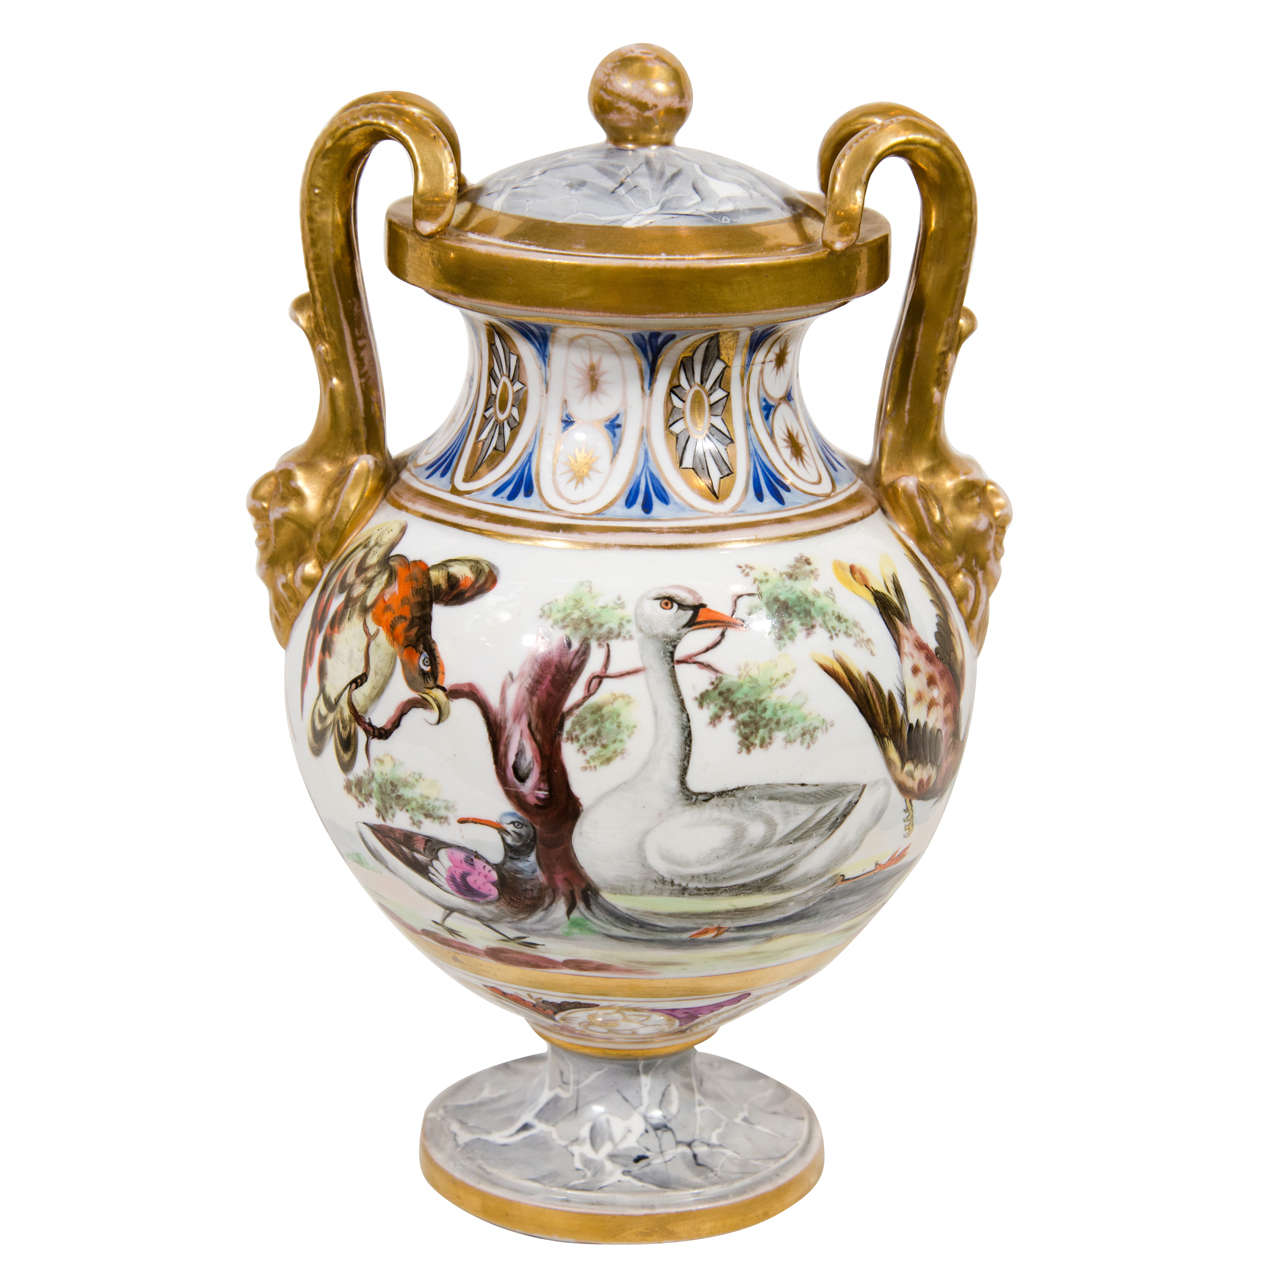 An English Regency Period Covered Vase